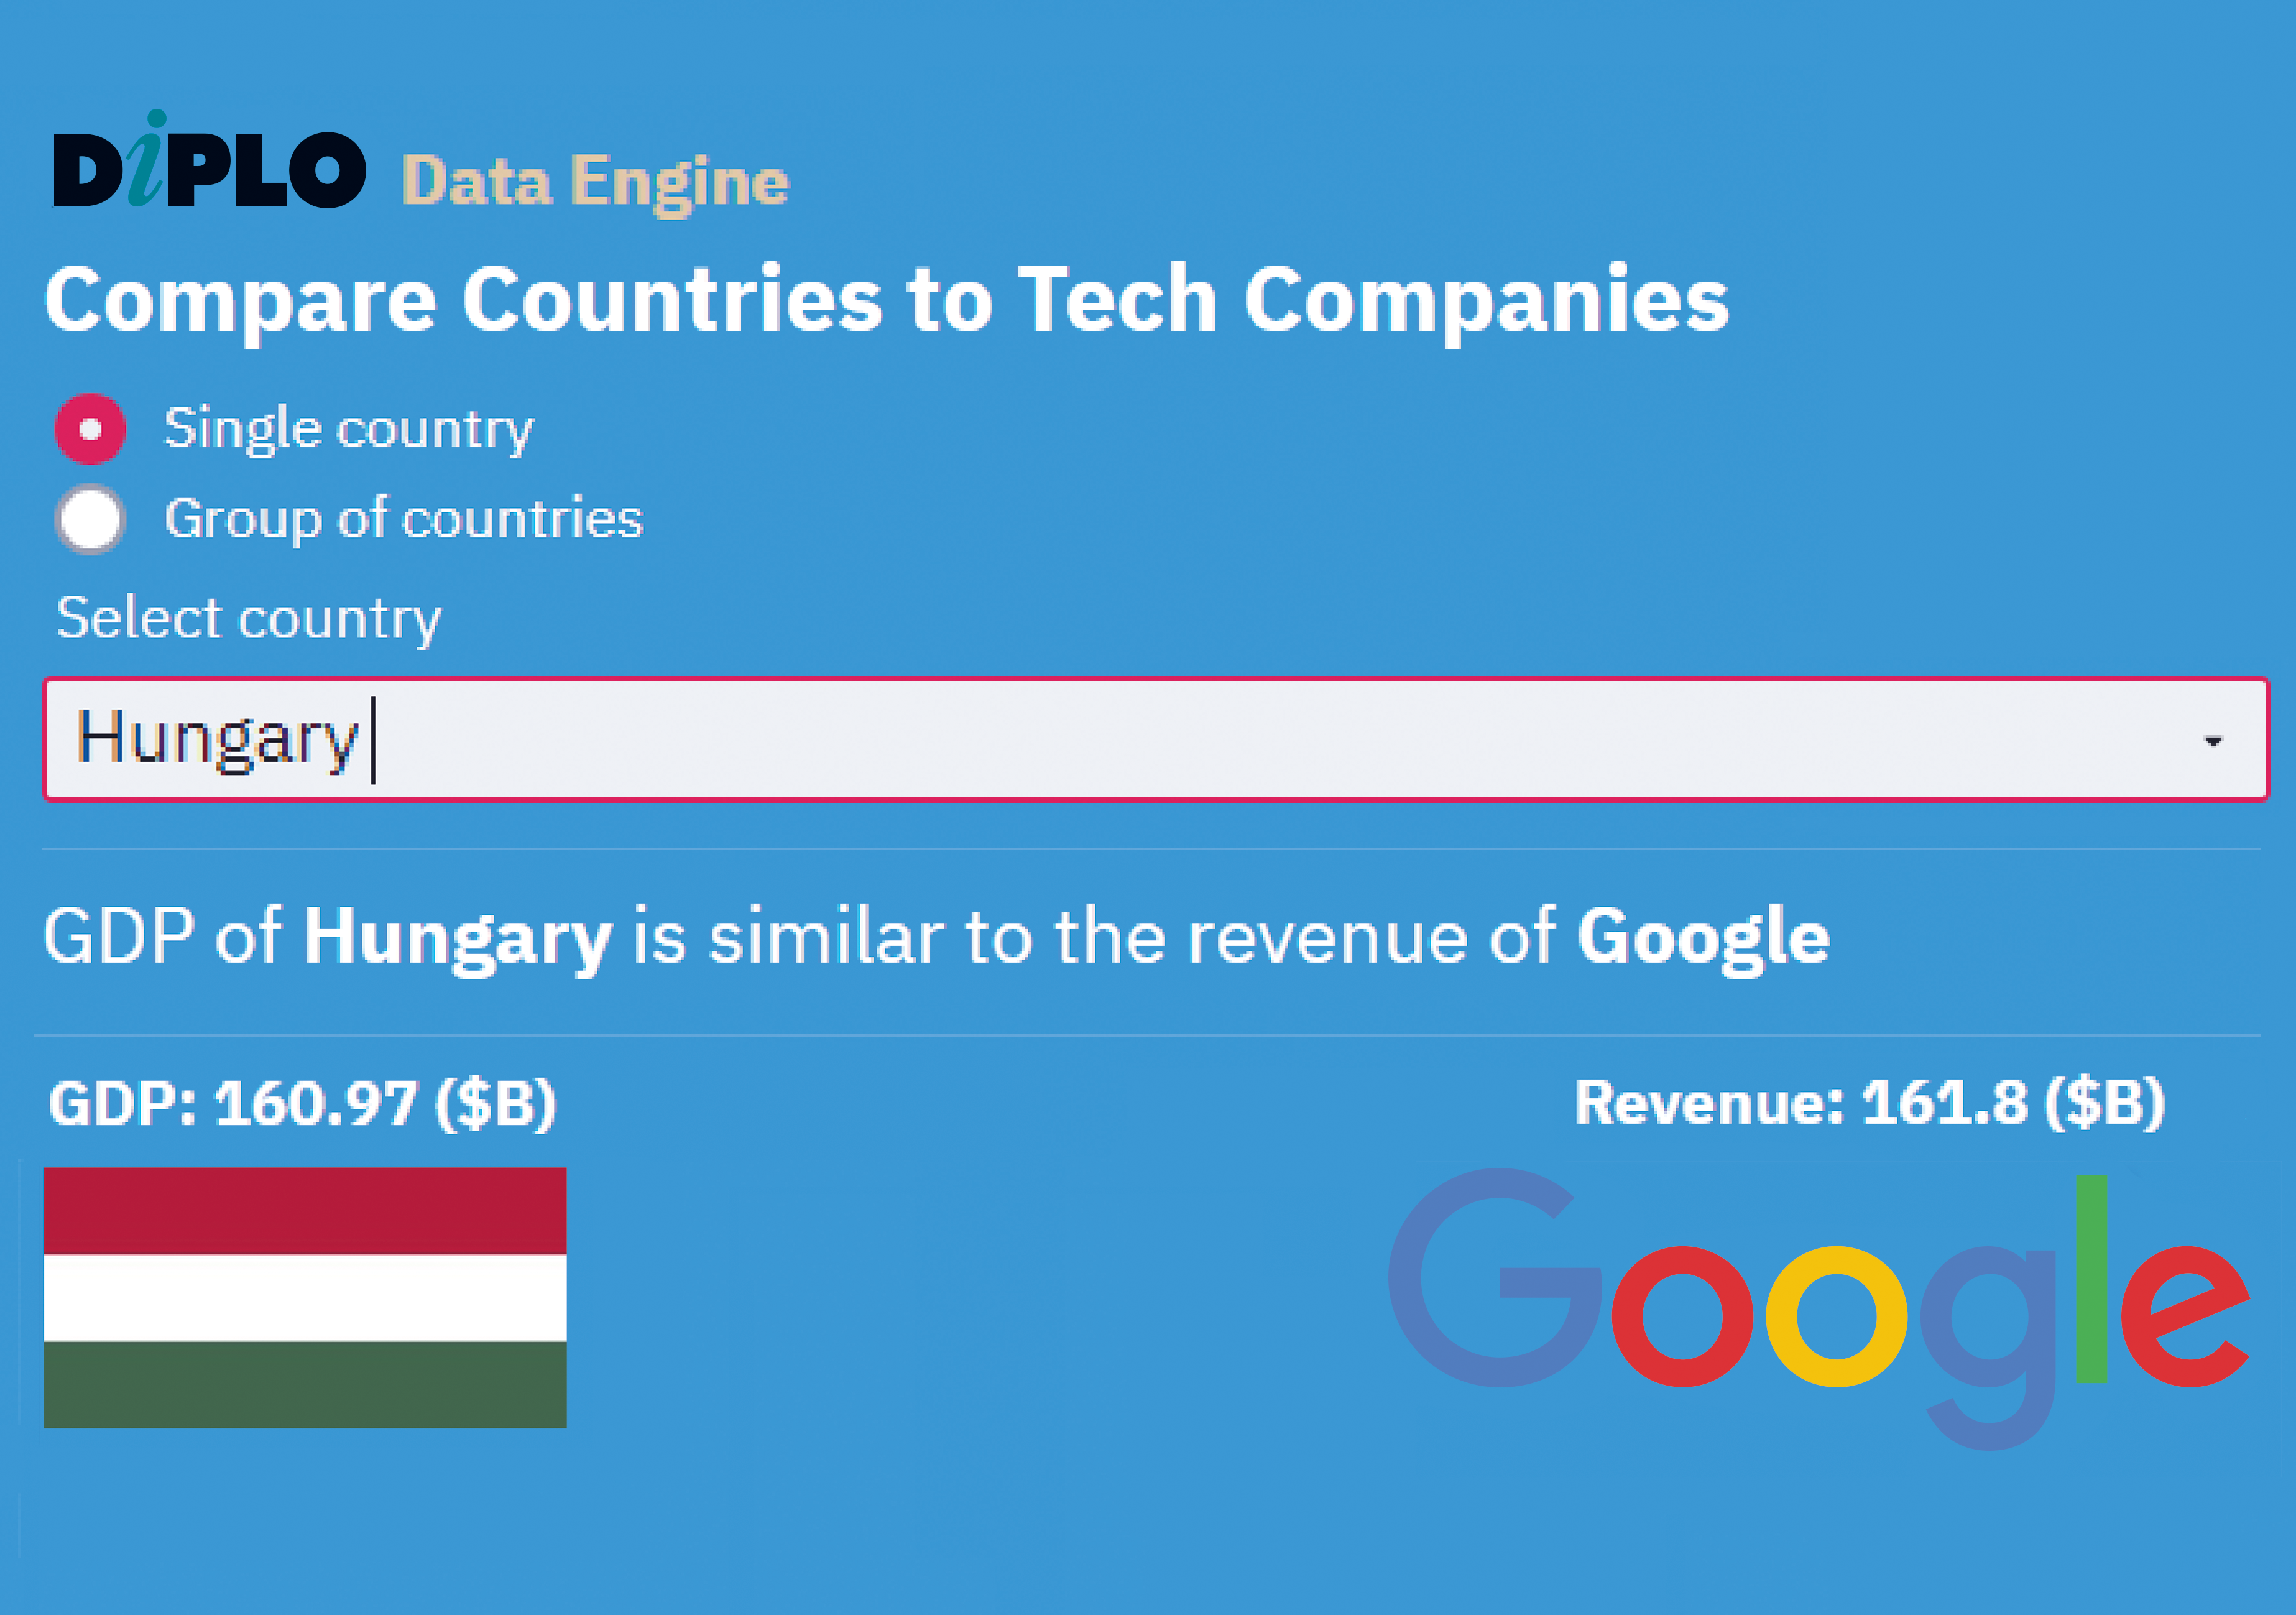 Comparing countries and tech companies